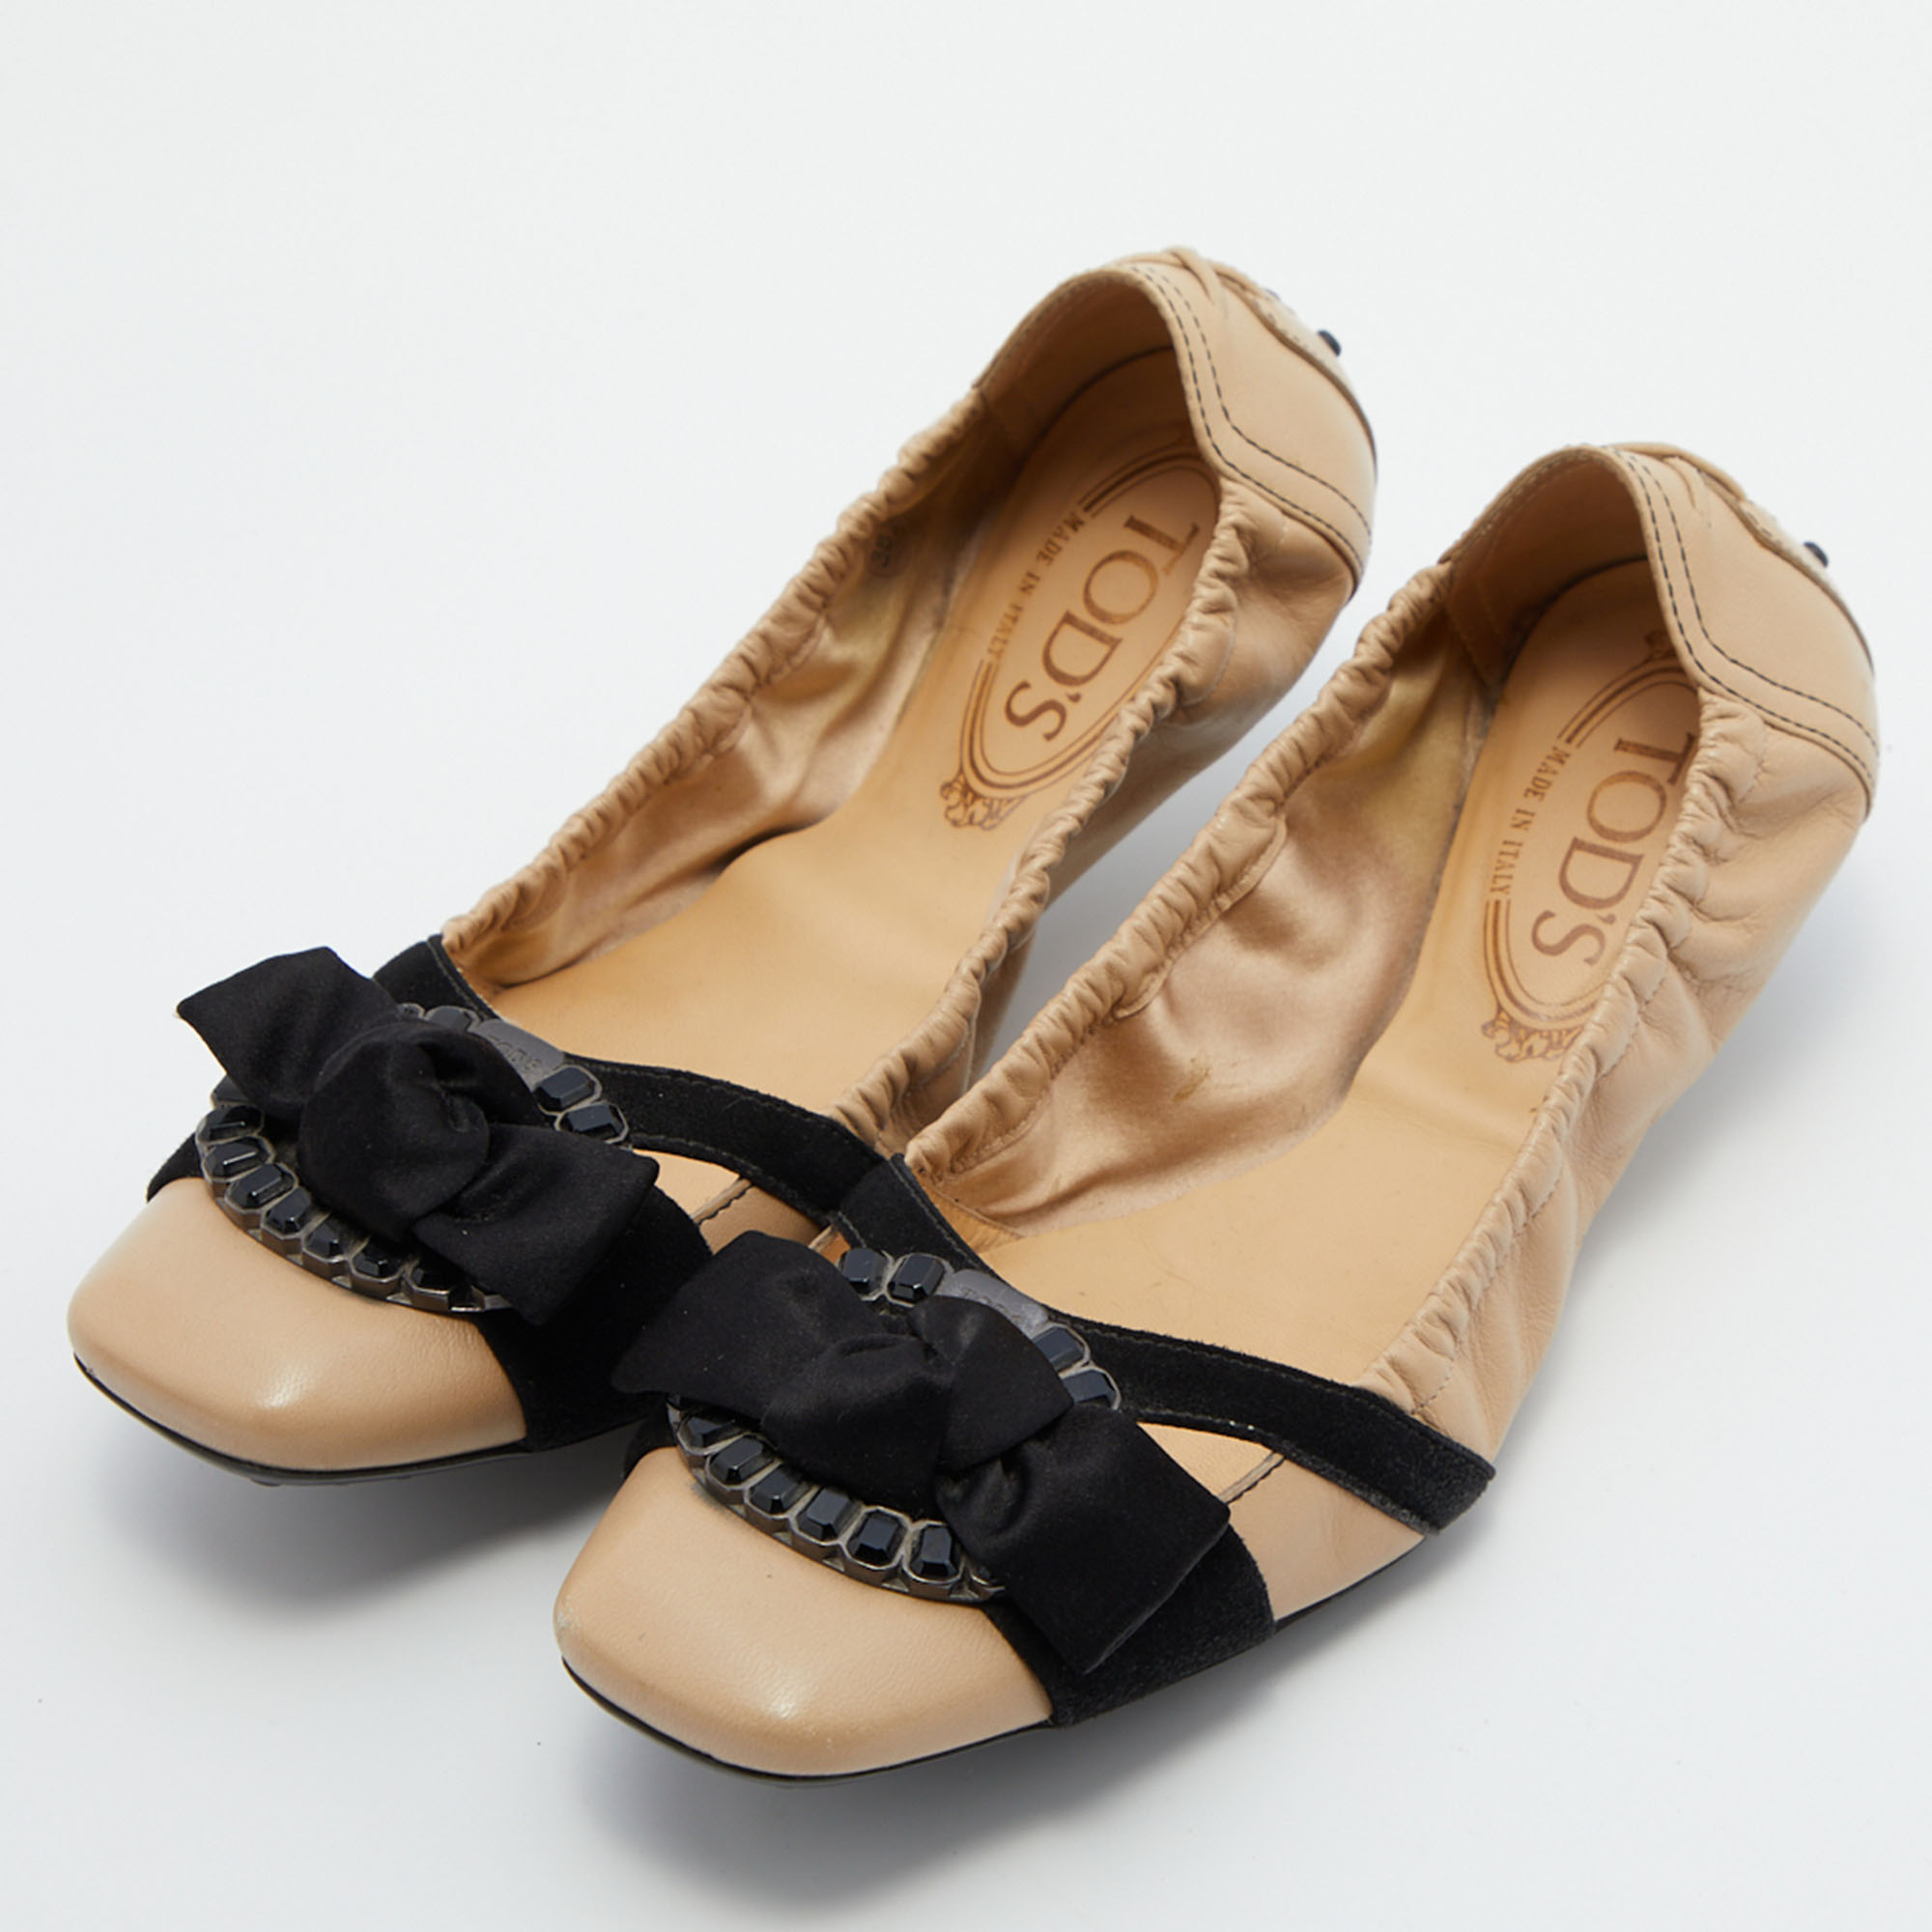 

Tod's Beige/Black Leather and Suede Cap Toe Buckle Detail Scrunch Ballet Flats Size